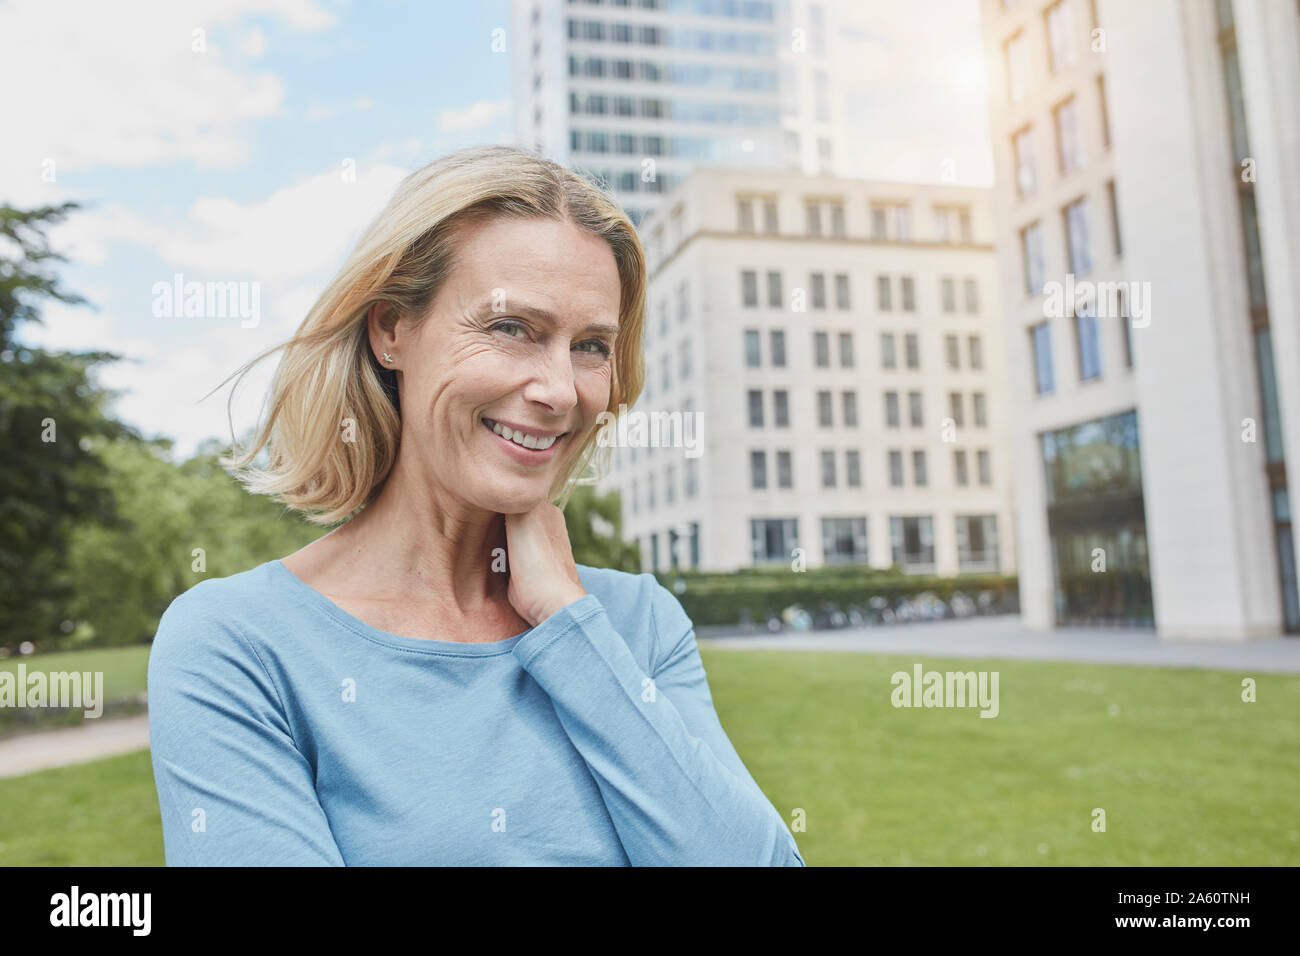 Portrait of smiling blond woman in the city Stock Photo